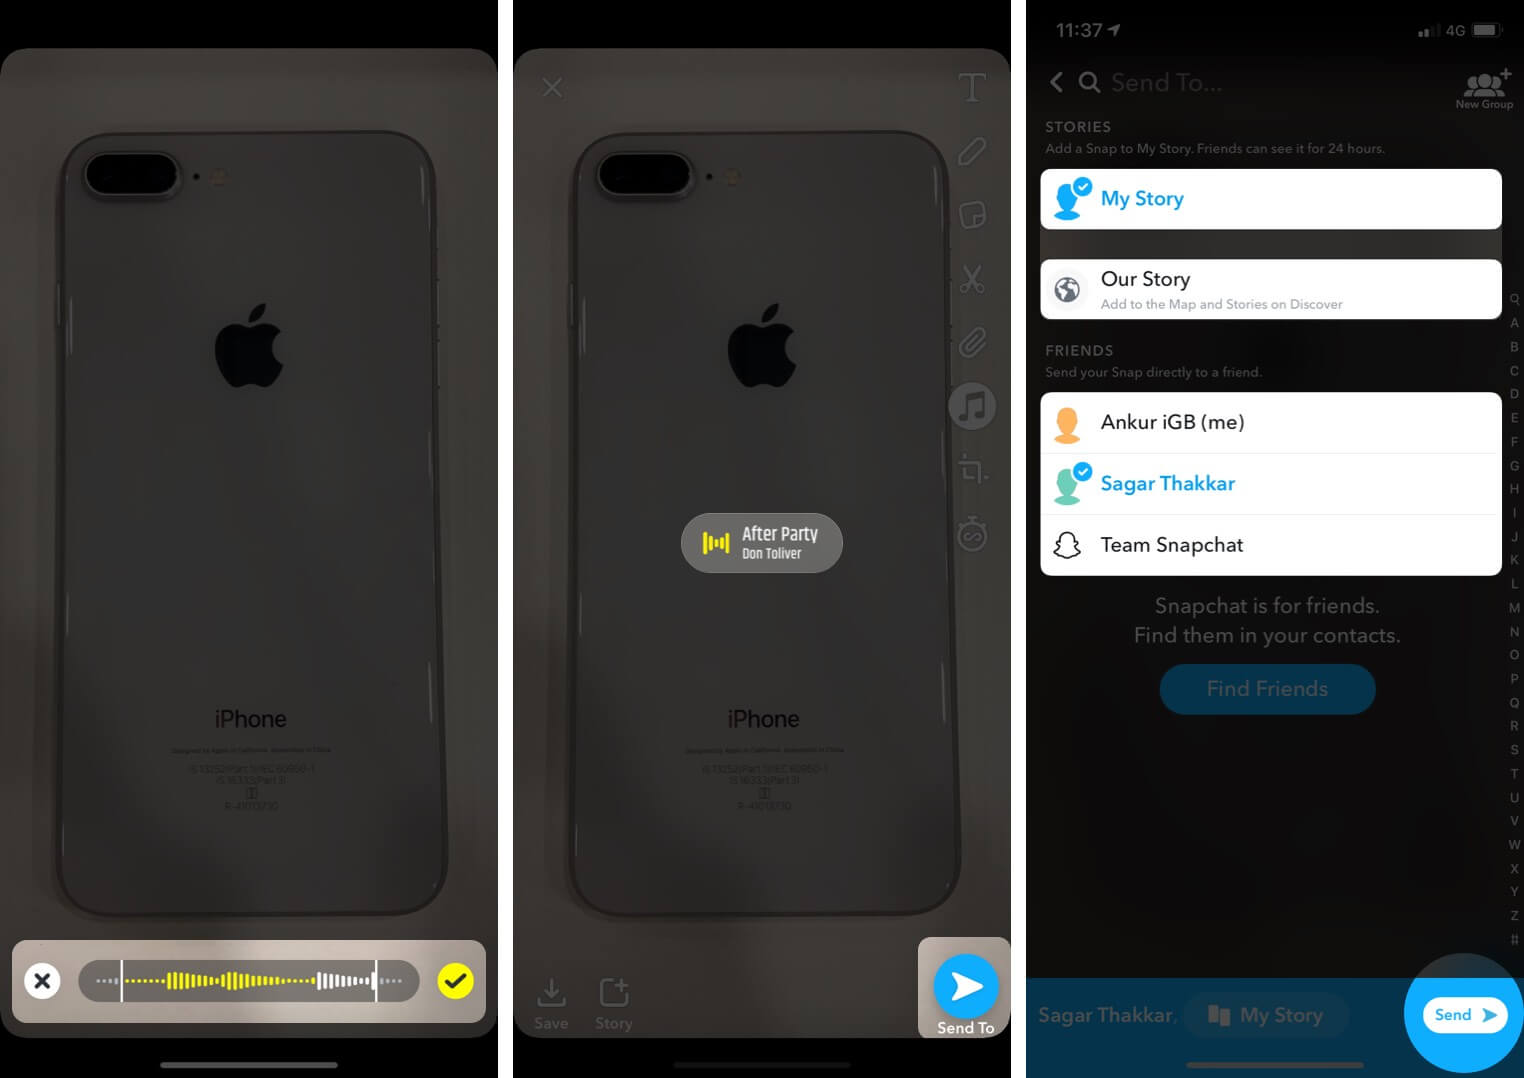 Add Music on Snaps and Stories in Snapchat and Share it from iPhone